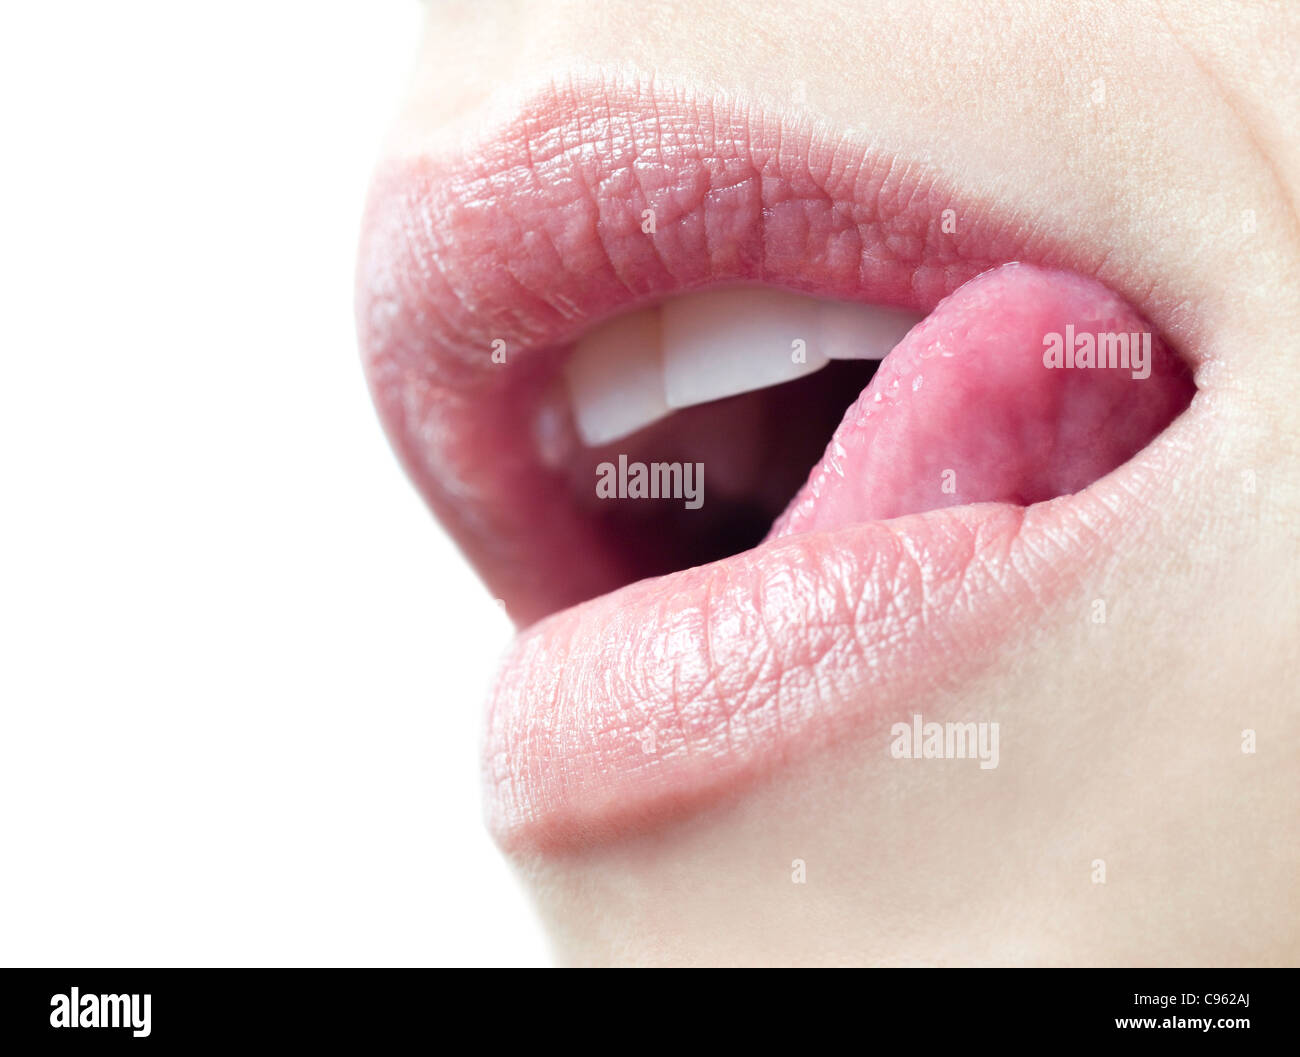 Woman licking her lips. Stock Photo